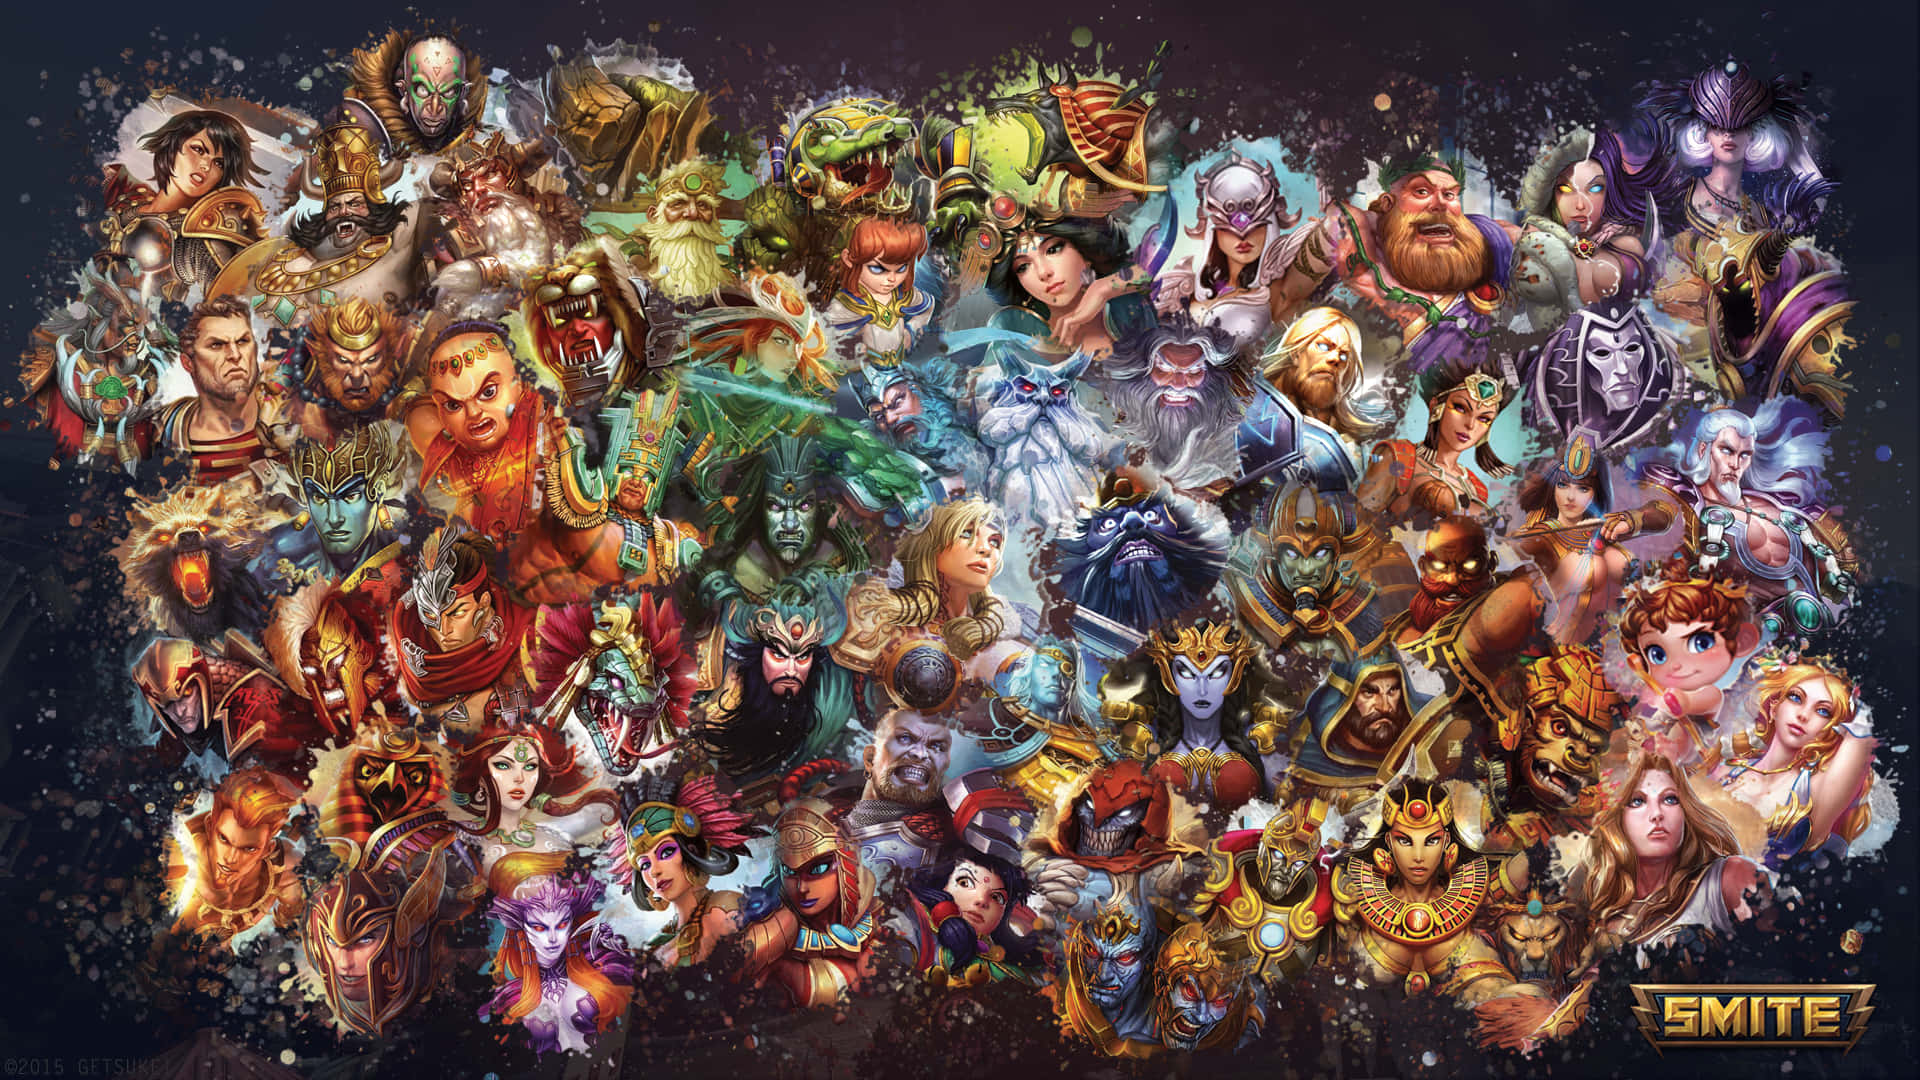 Download High-Resolution Image and Feel the Power of Smite Wallpaper